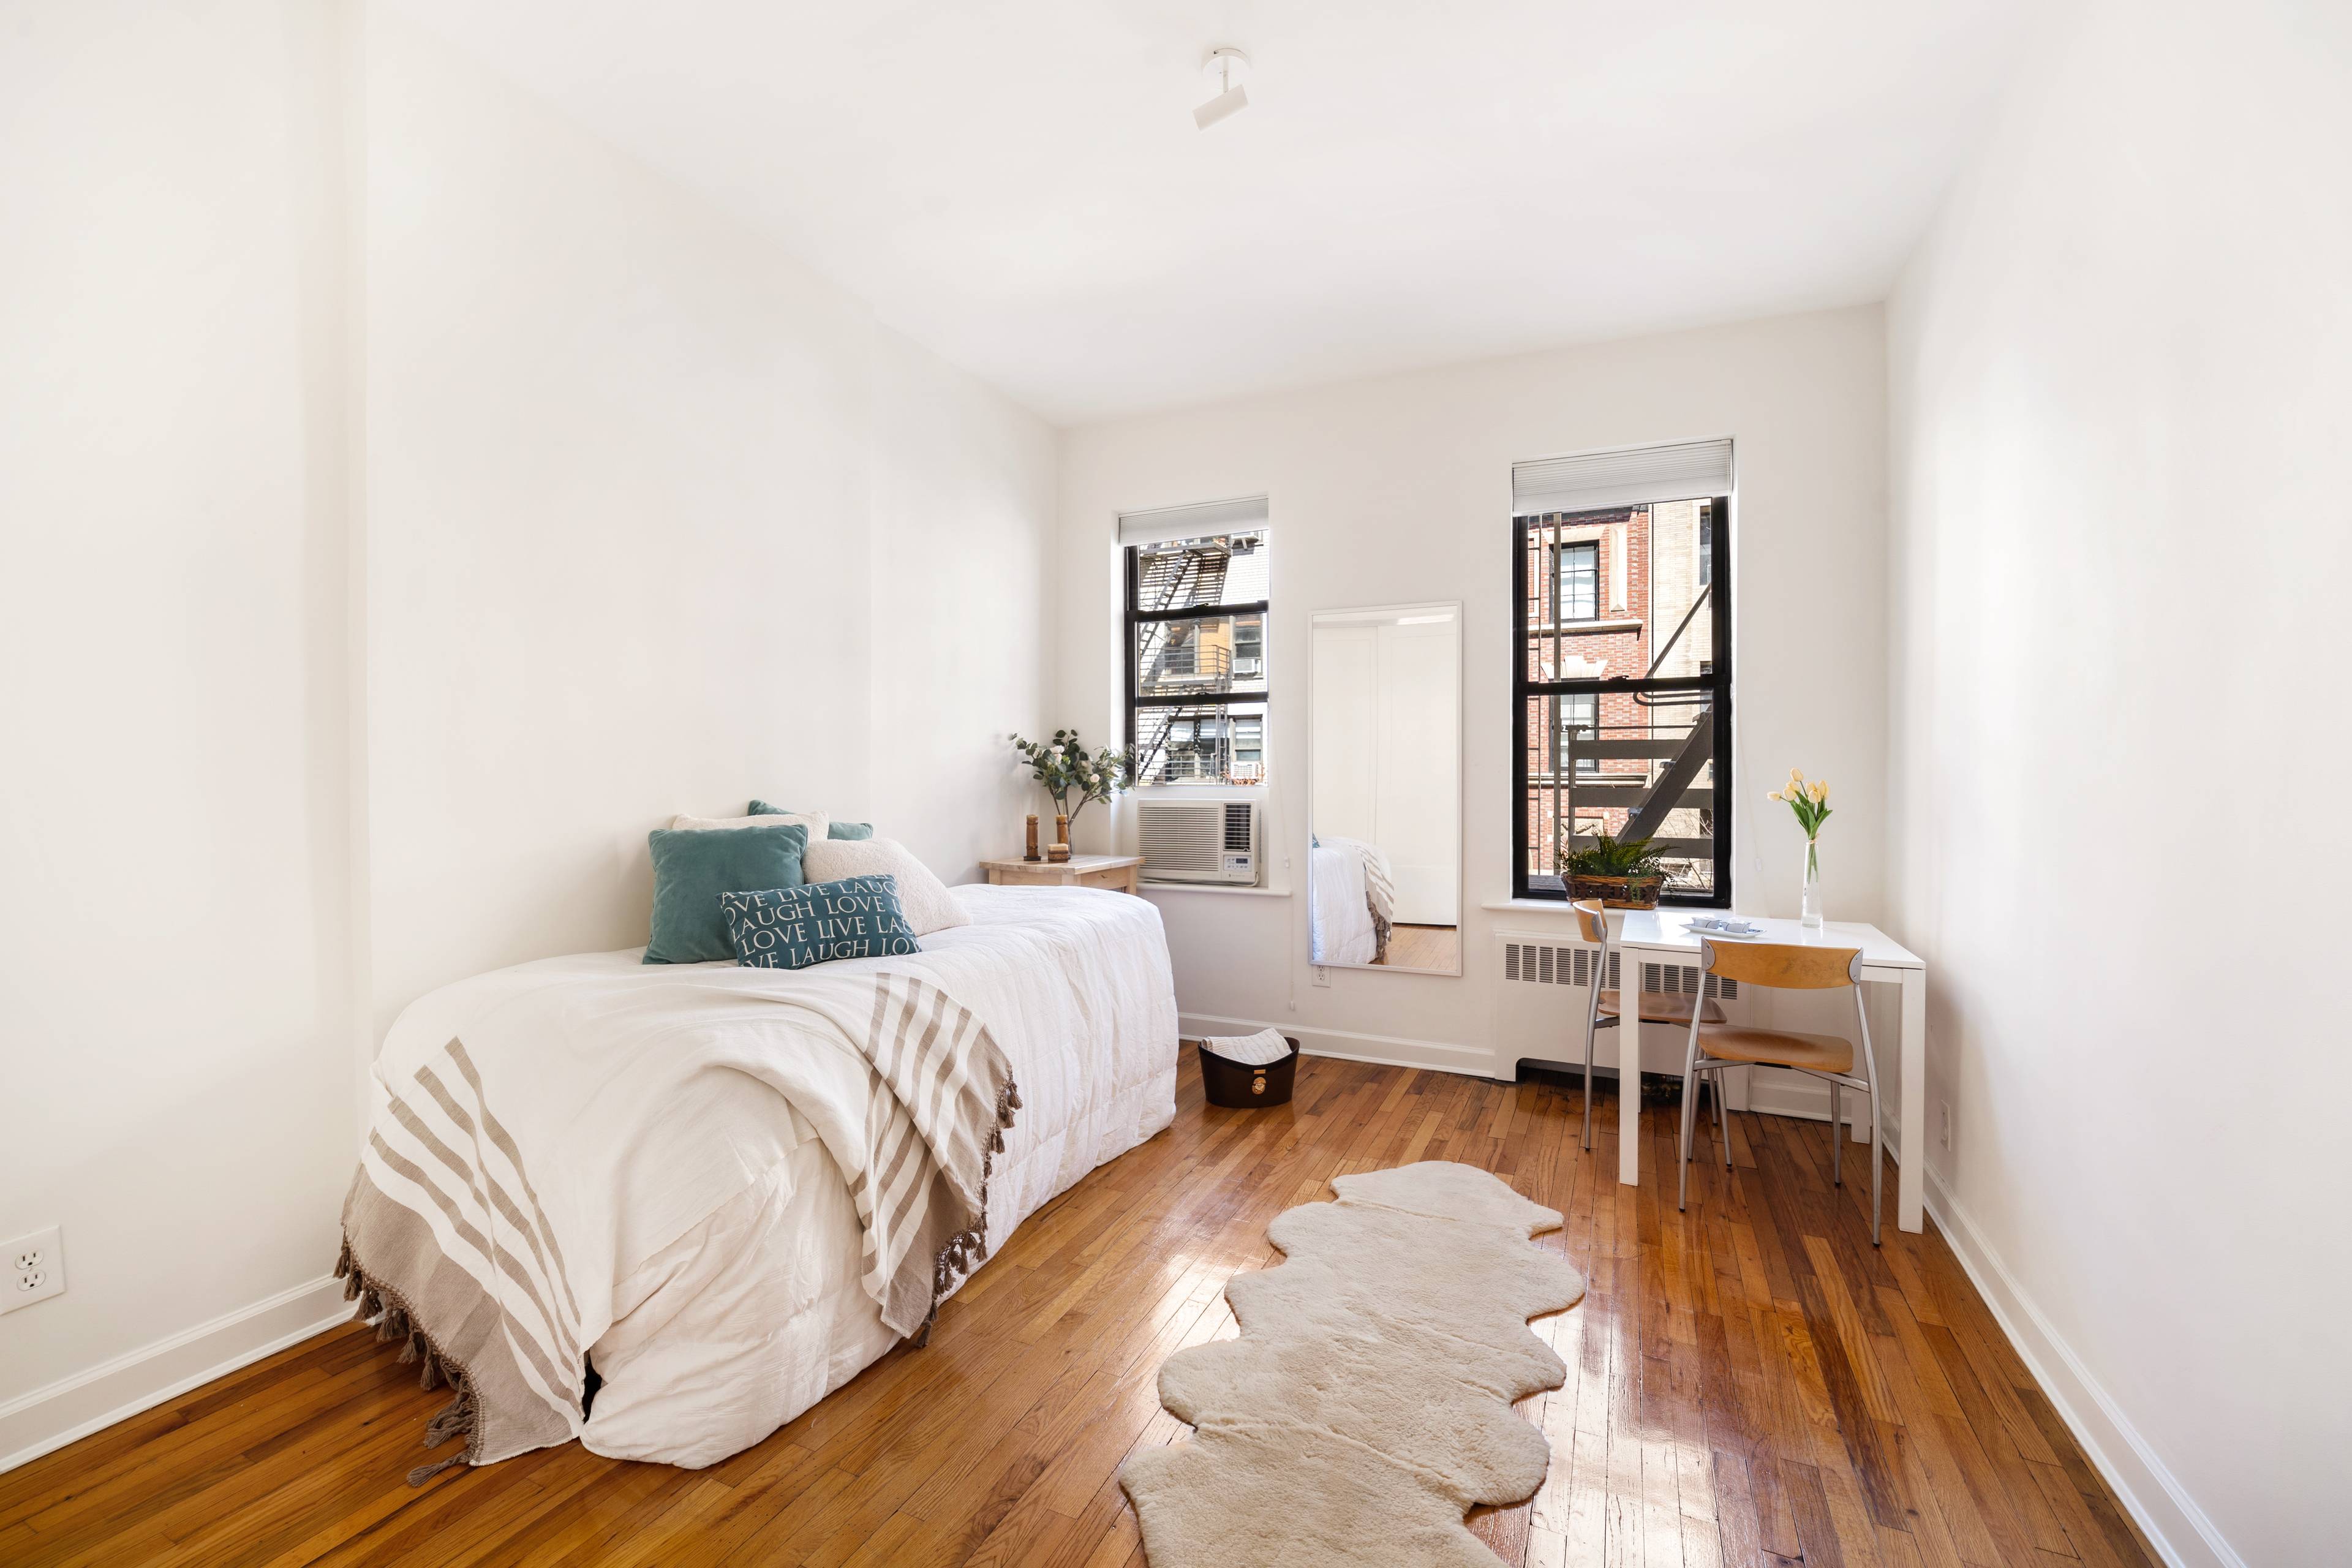 Upper East Side Stylish, charming studio apartment 2D situated on East 83rd Street between Park and Lexington Avenues.